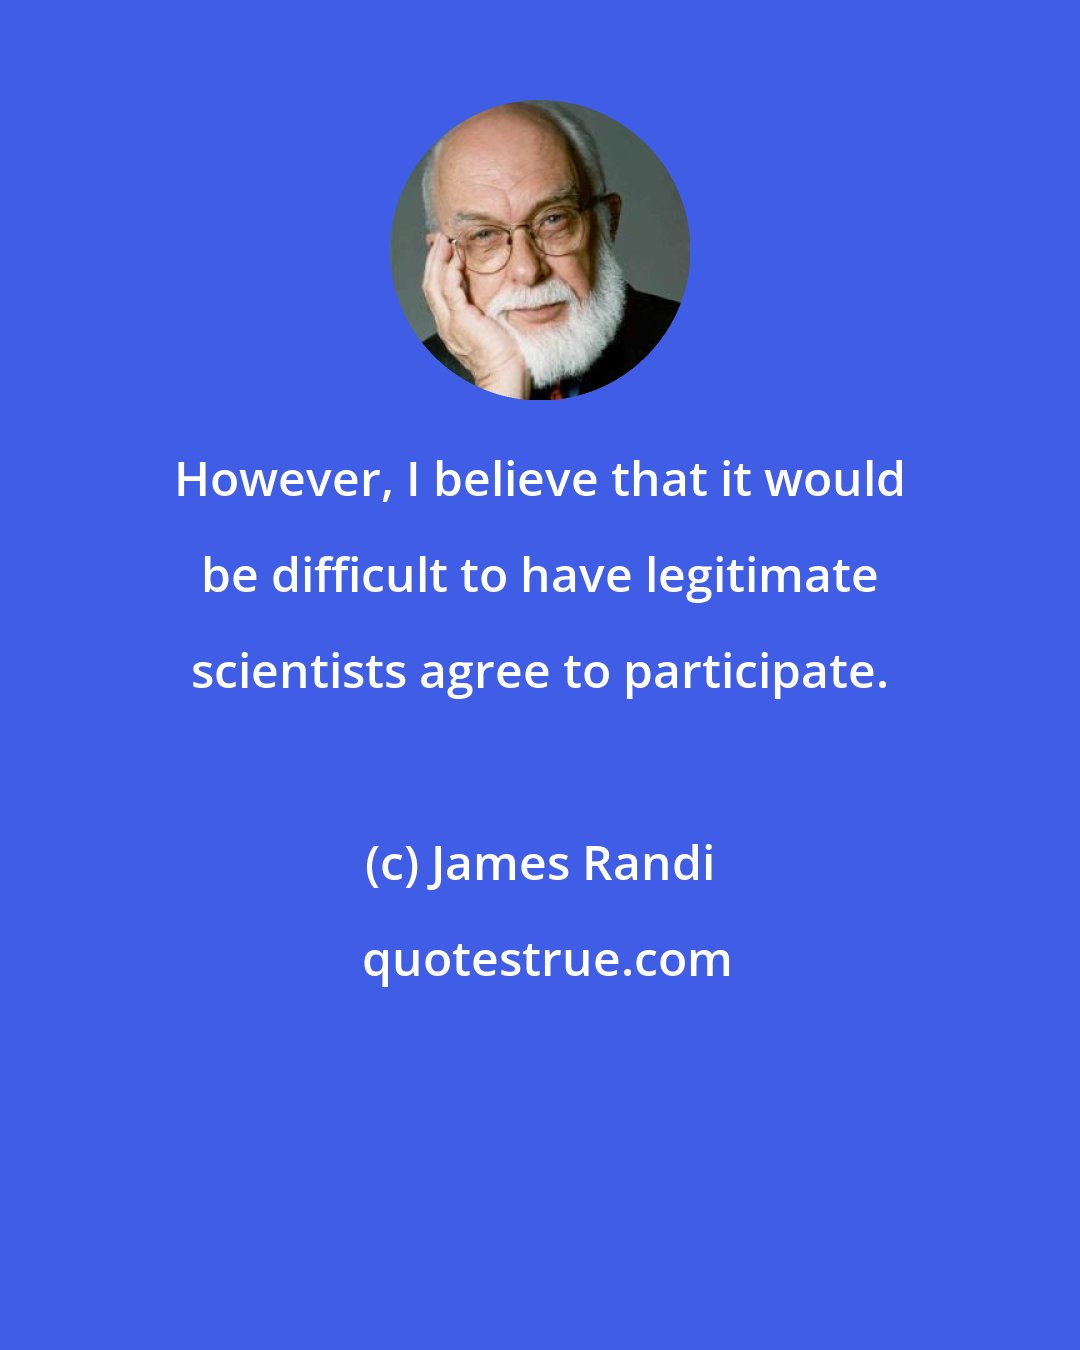 James Randi: However, I believe that it would be difficult to have legitimate scientists agree to participate.